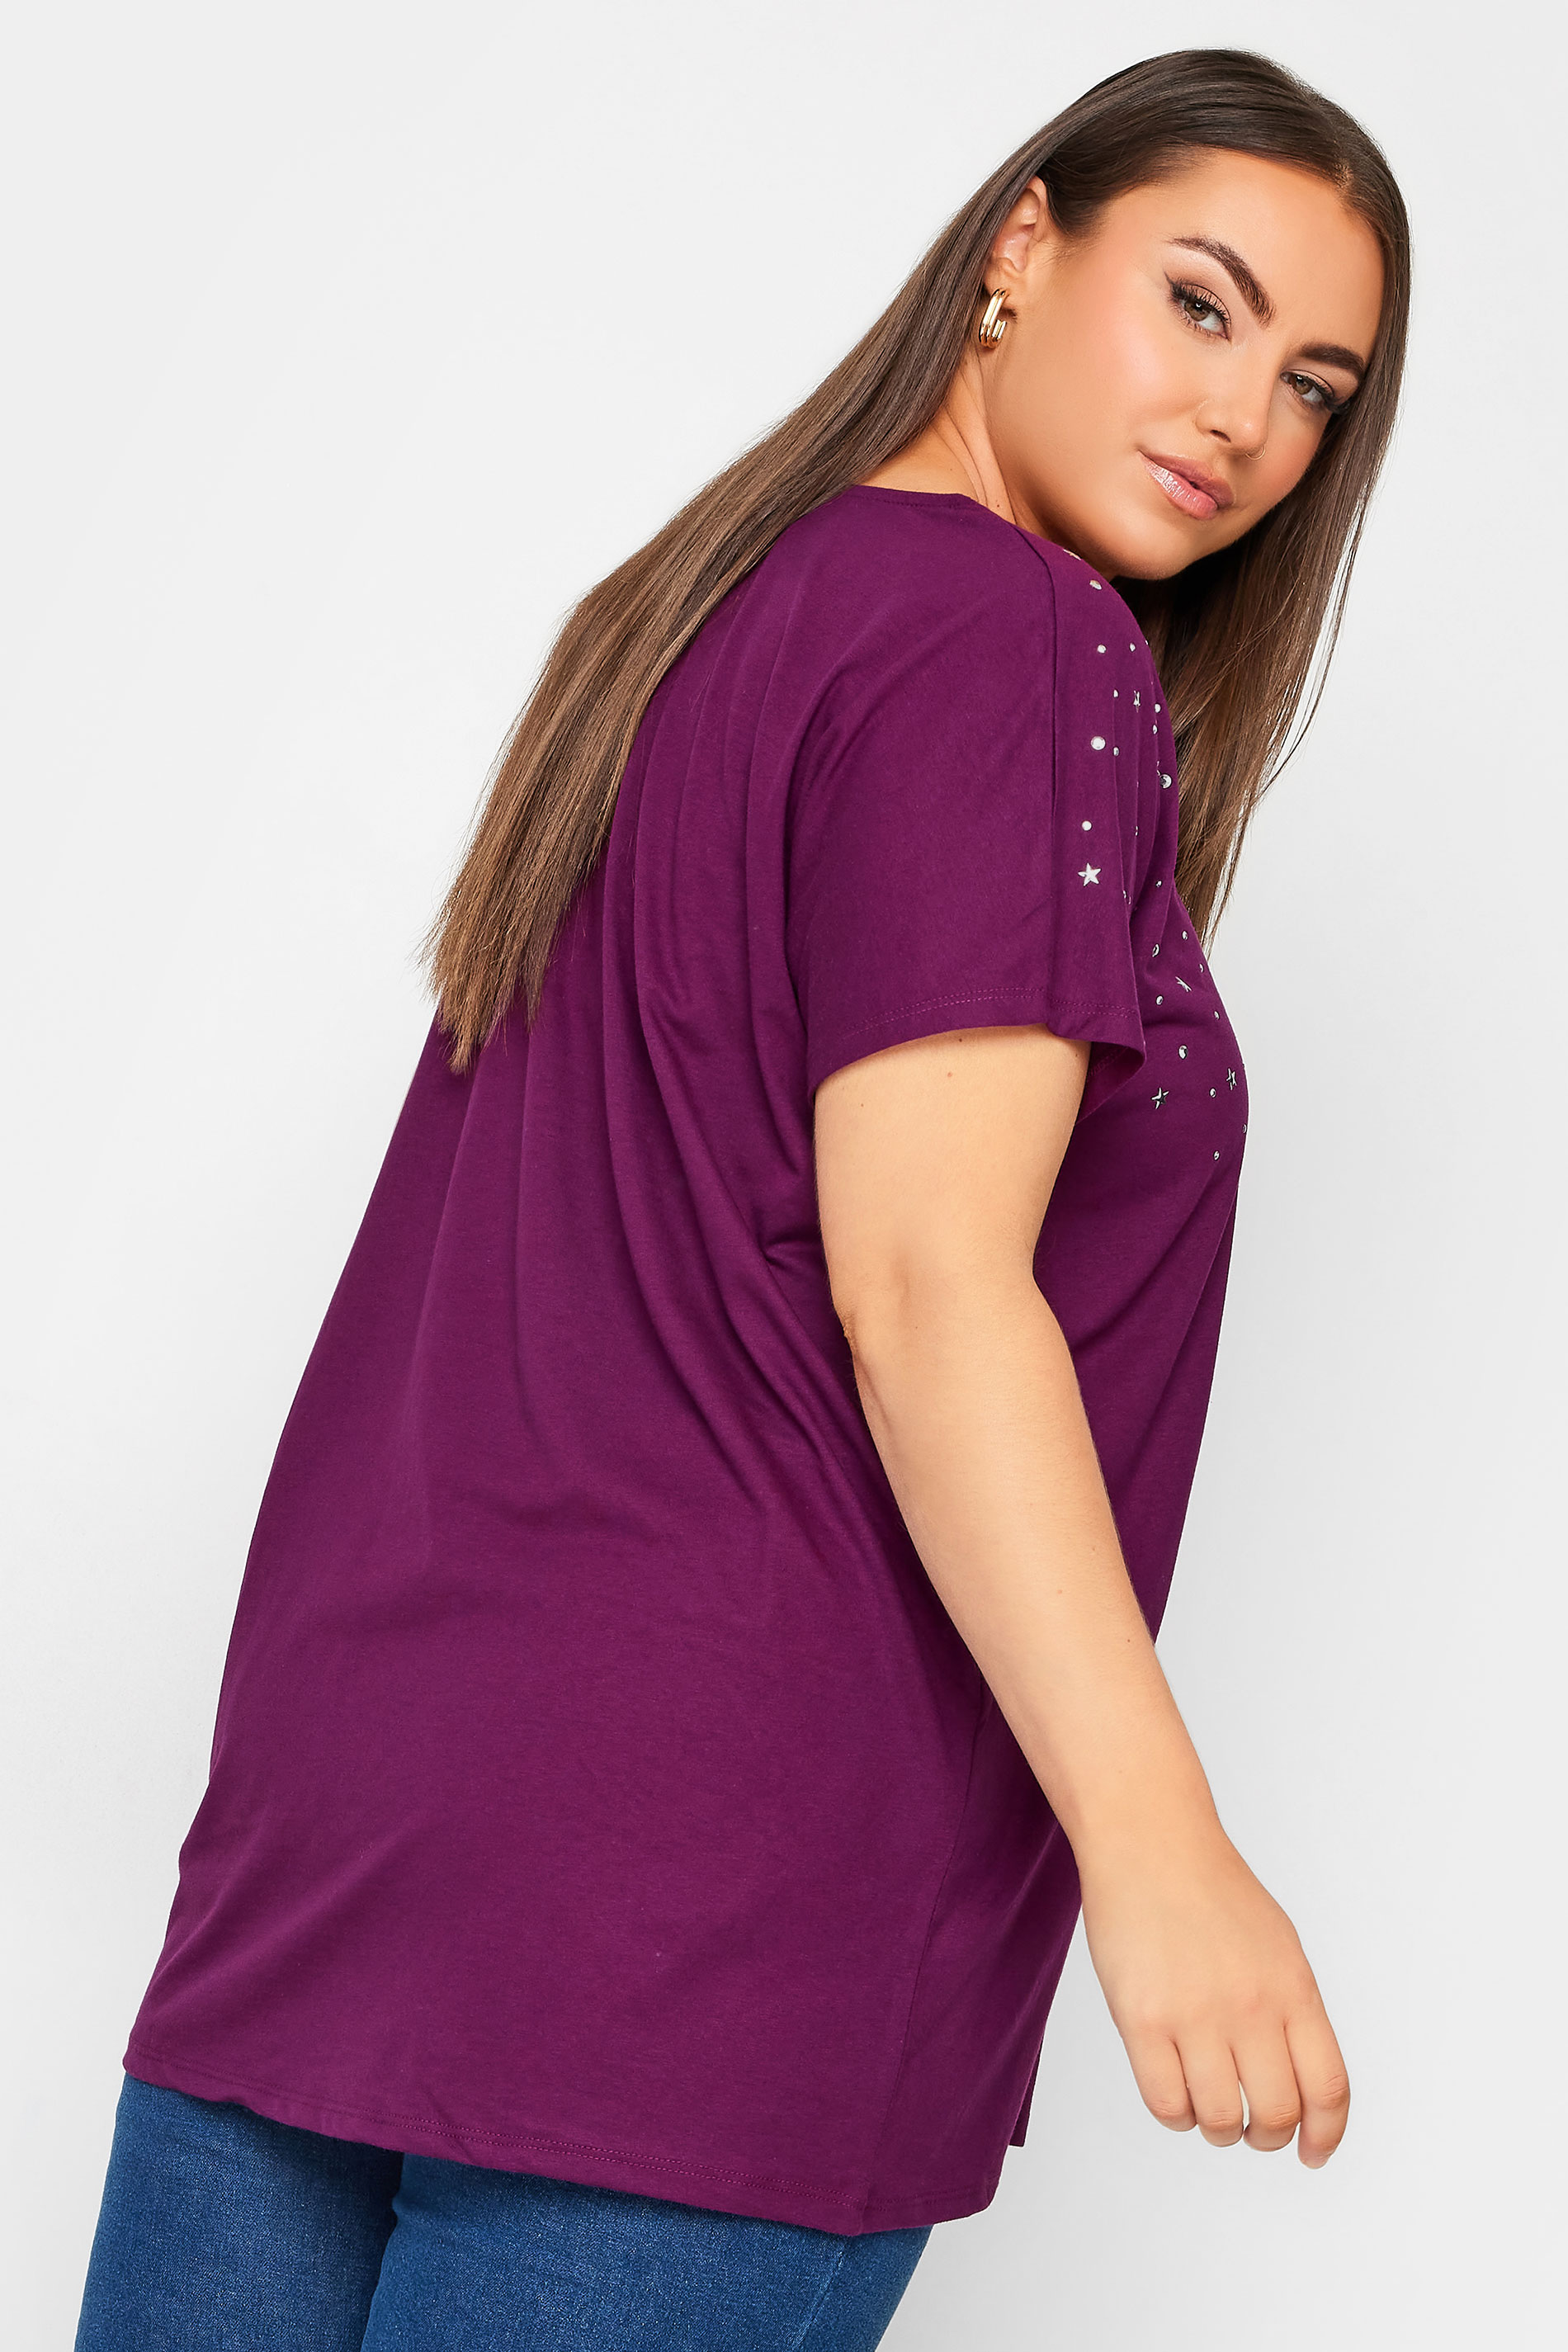 Jersey  Purple and black, Tops & tees, Women shopping